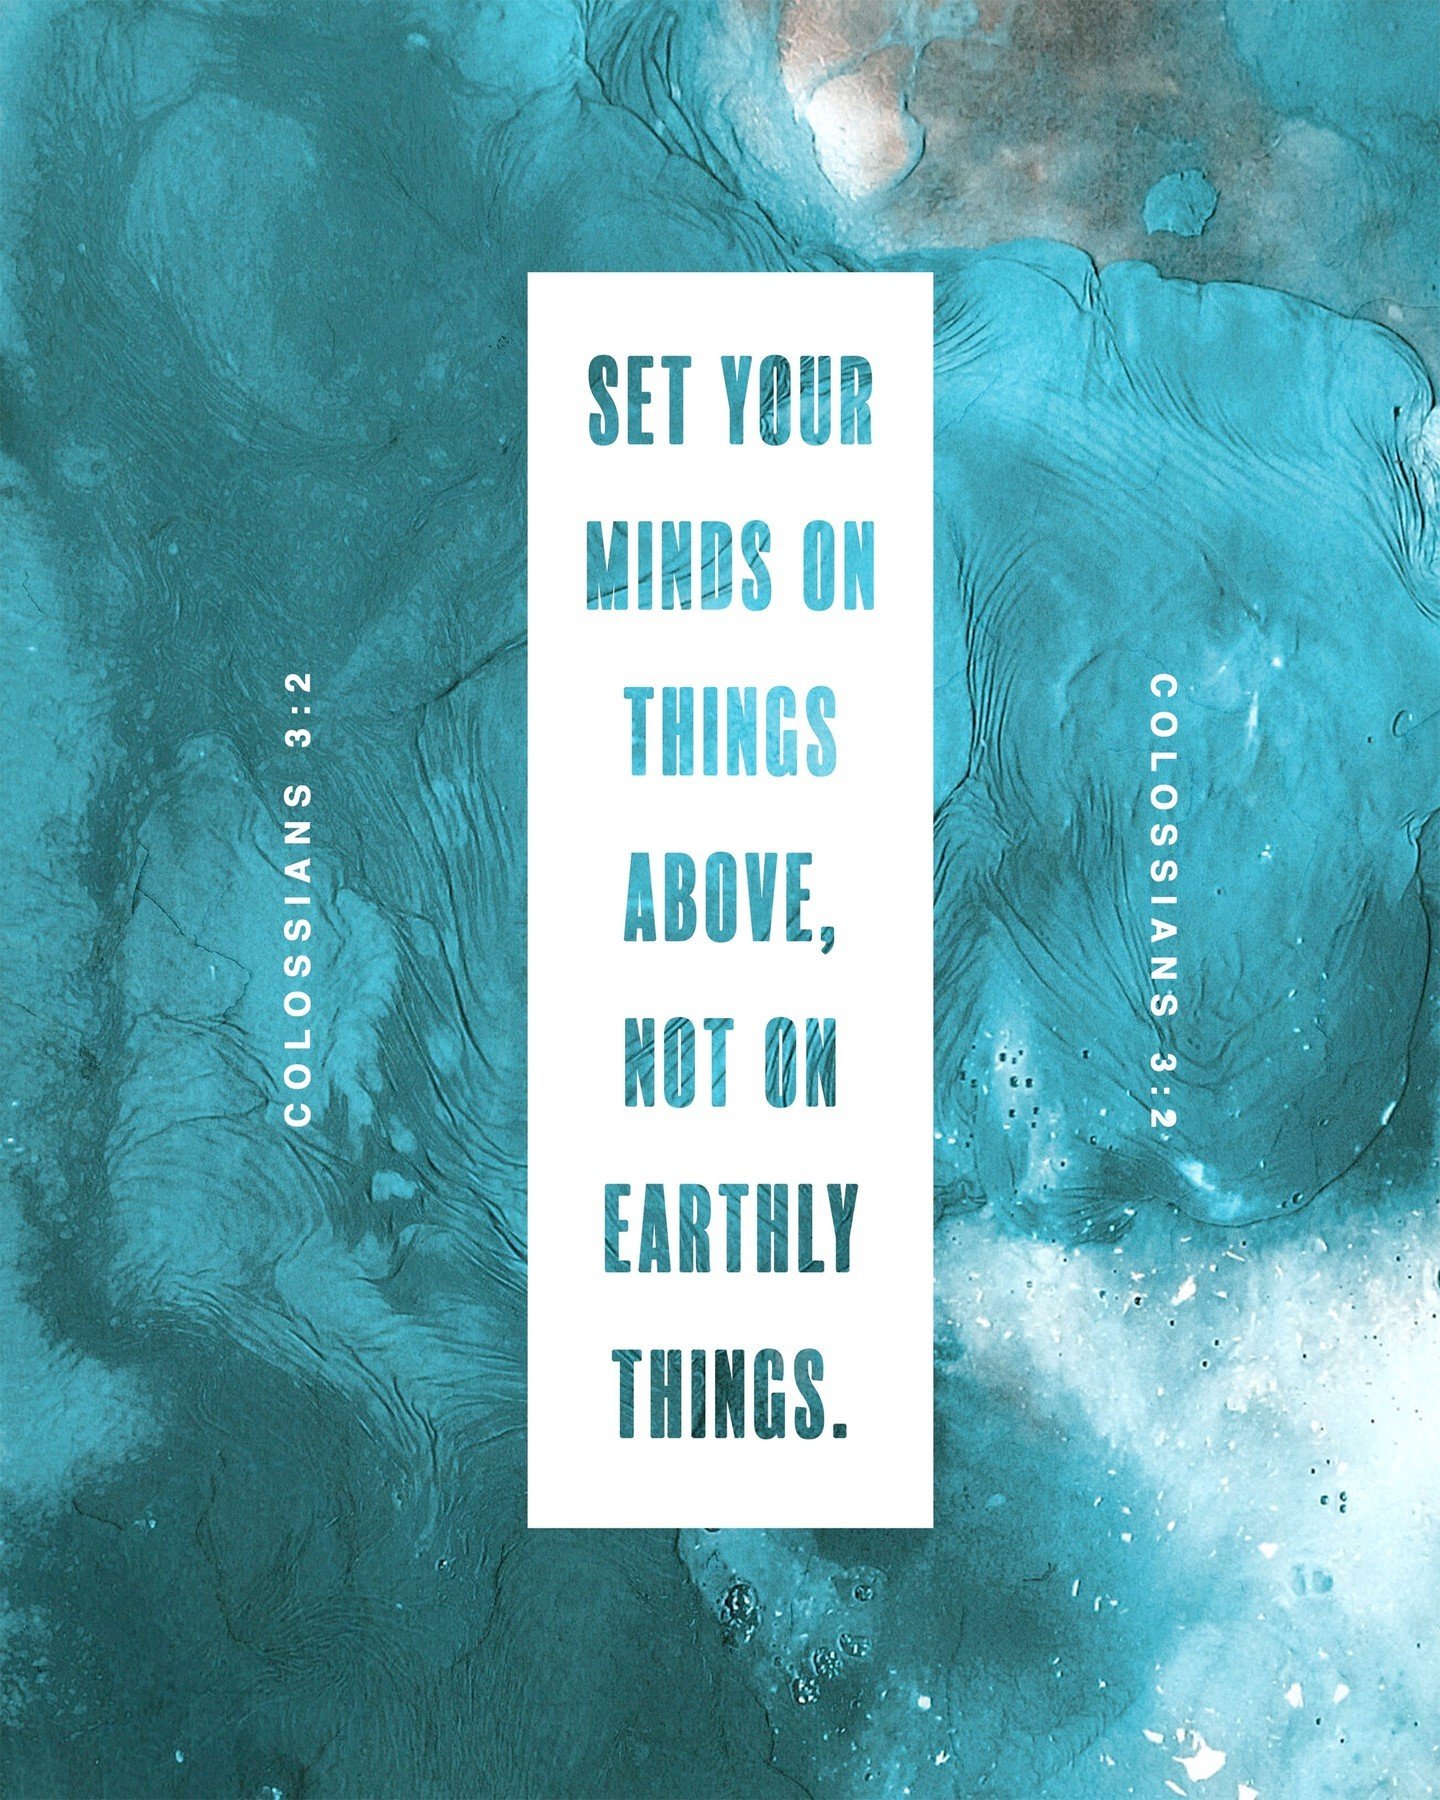 &quot;Set your minds on things above, not on earthly things.&quot; - Colossians 3:2
.
.
.
#church #god #morning #jesus #christ #love #christian #worship #bible #colossians